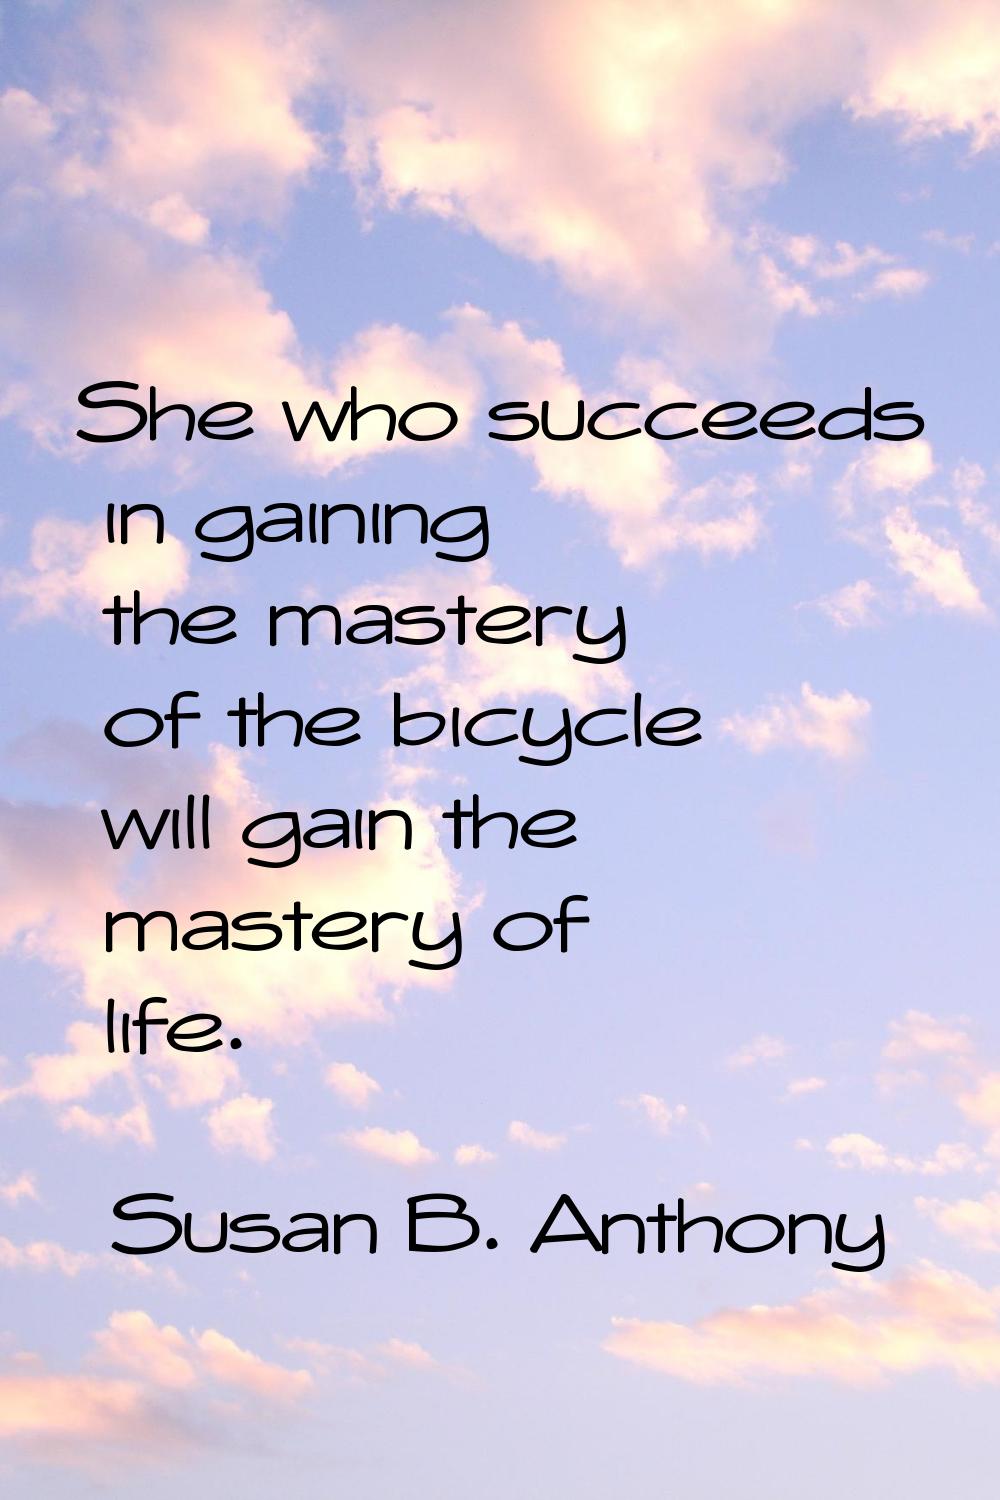 She who succeeds in gaining the mastery of the bicycle will gain the mastery of life.